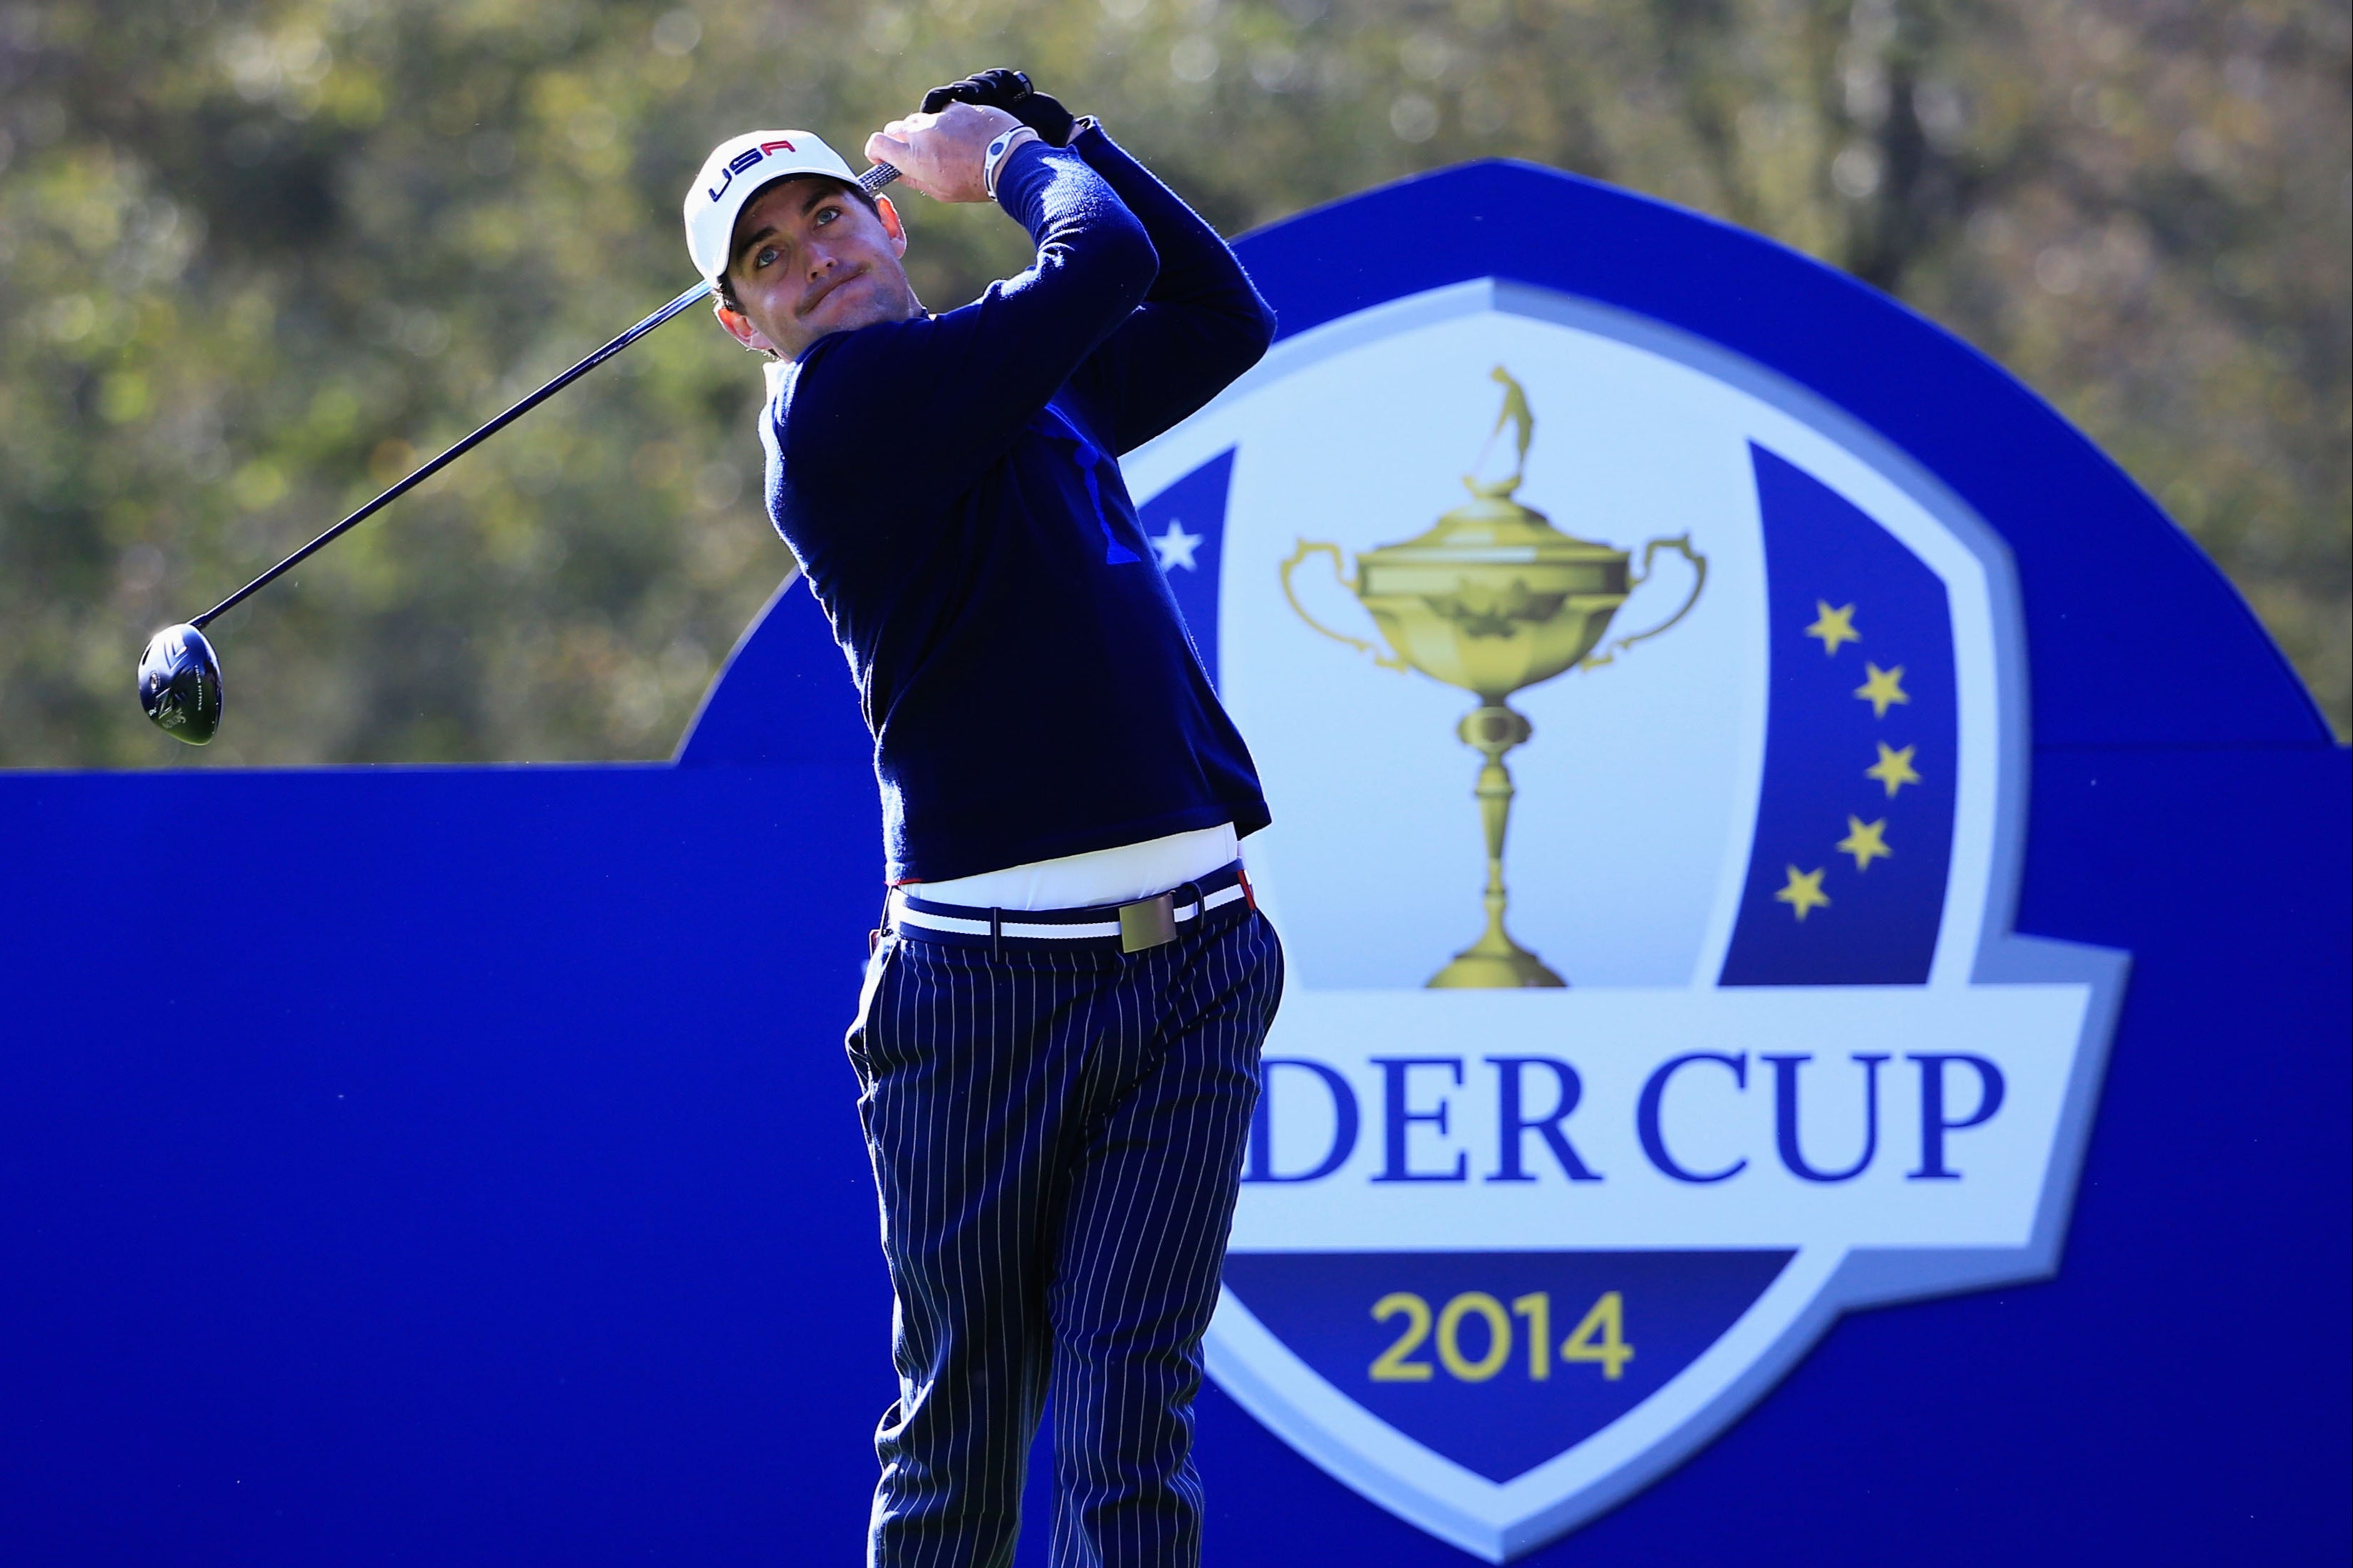 Keegan Bradley has featured twice as a player at the Ryder Cup